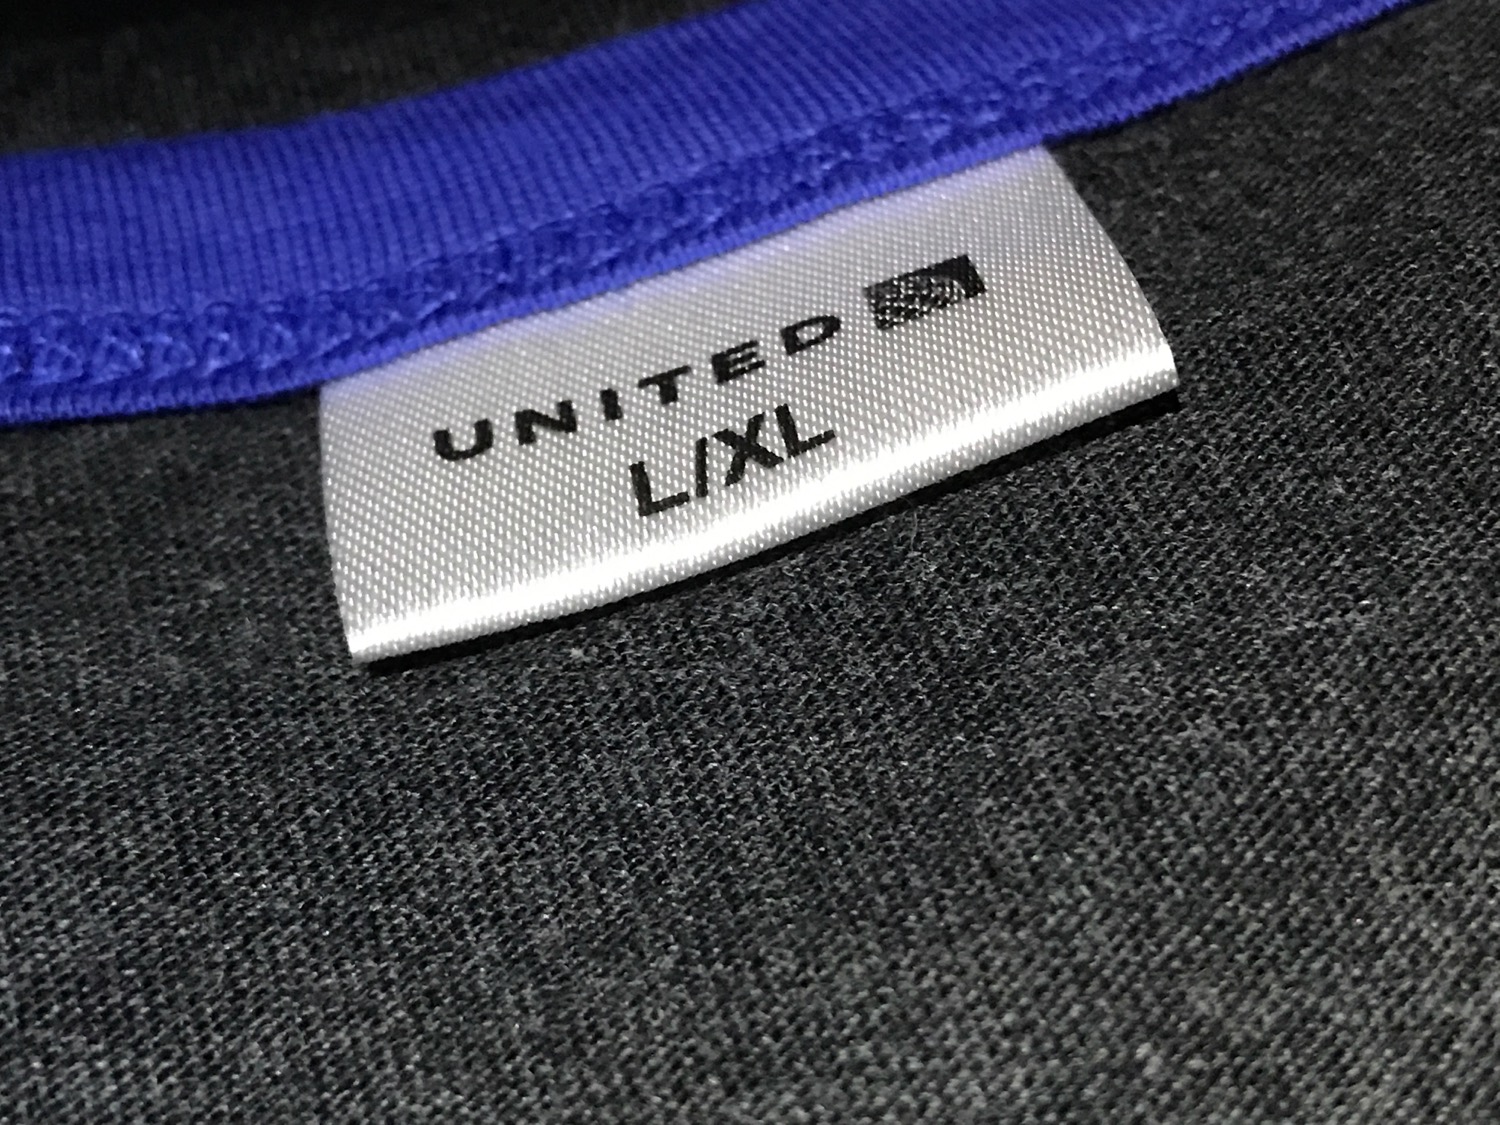 a white label on a blue fabric